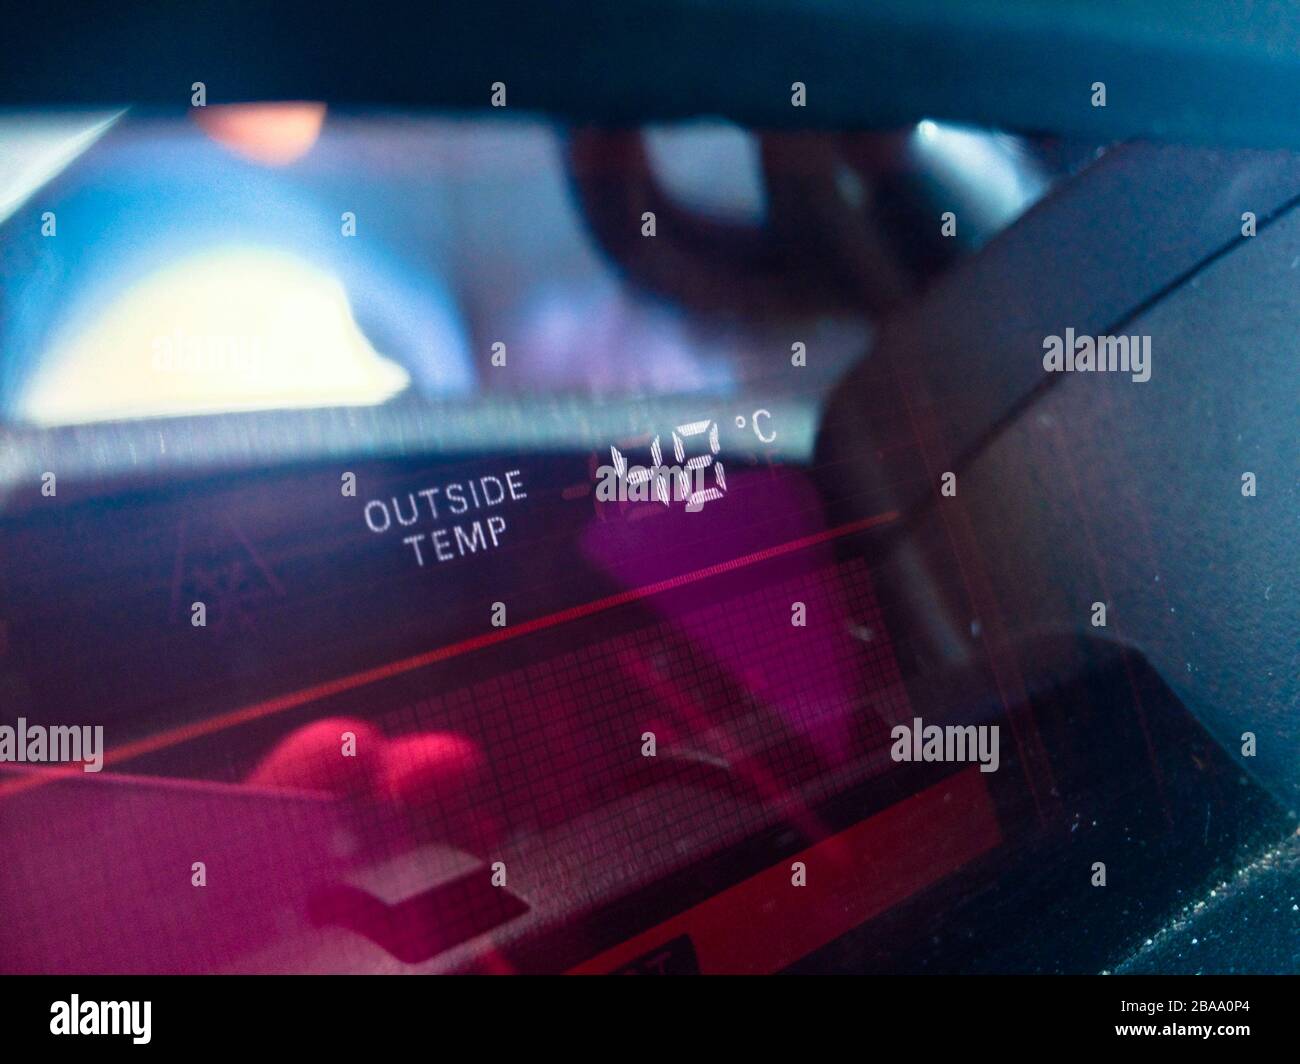 A car temperature gauge shows the outside temperature as 48c on a boiling summer day in Sydney, Australia Stock Photo